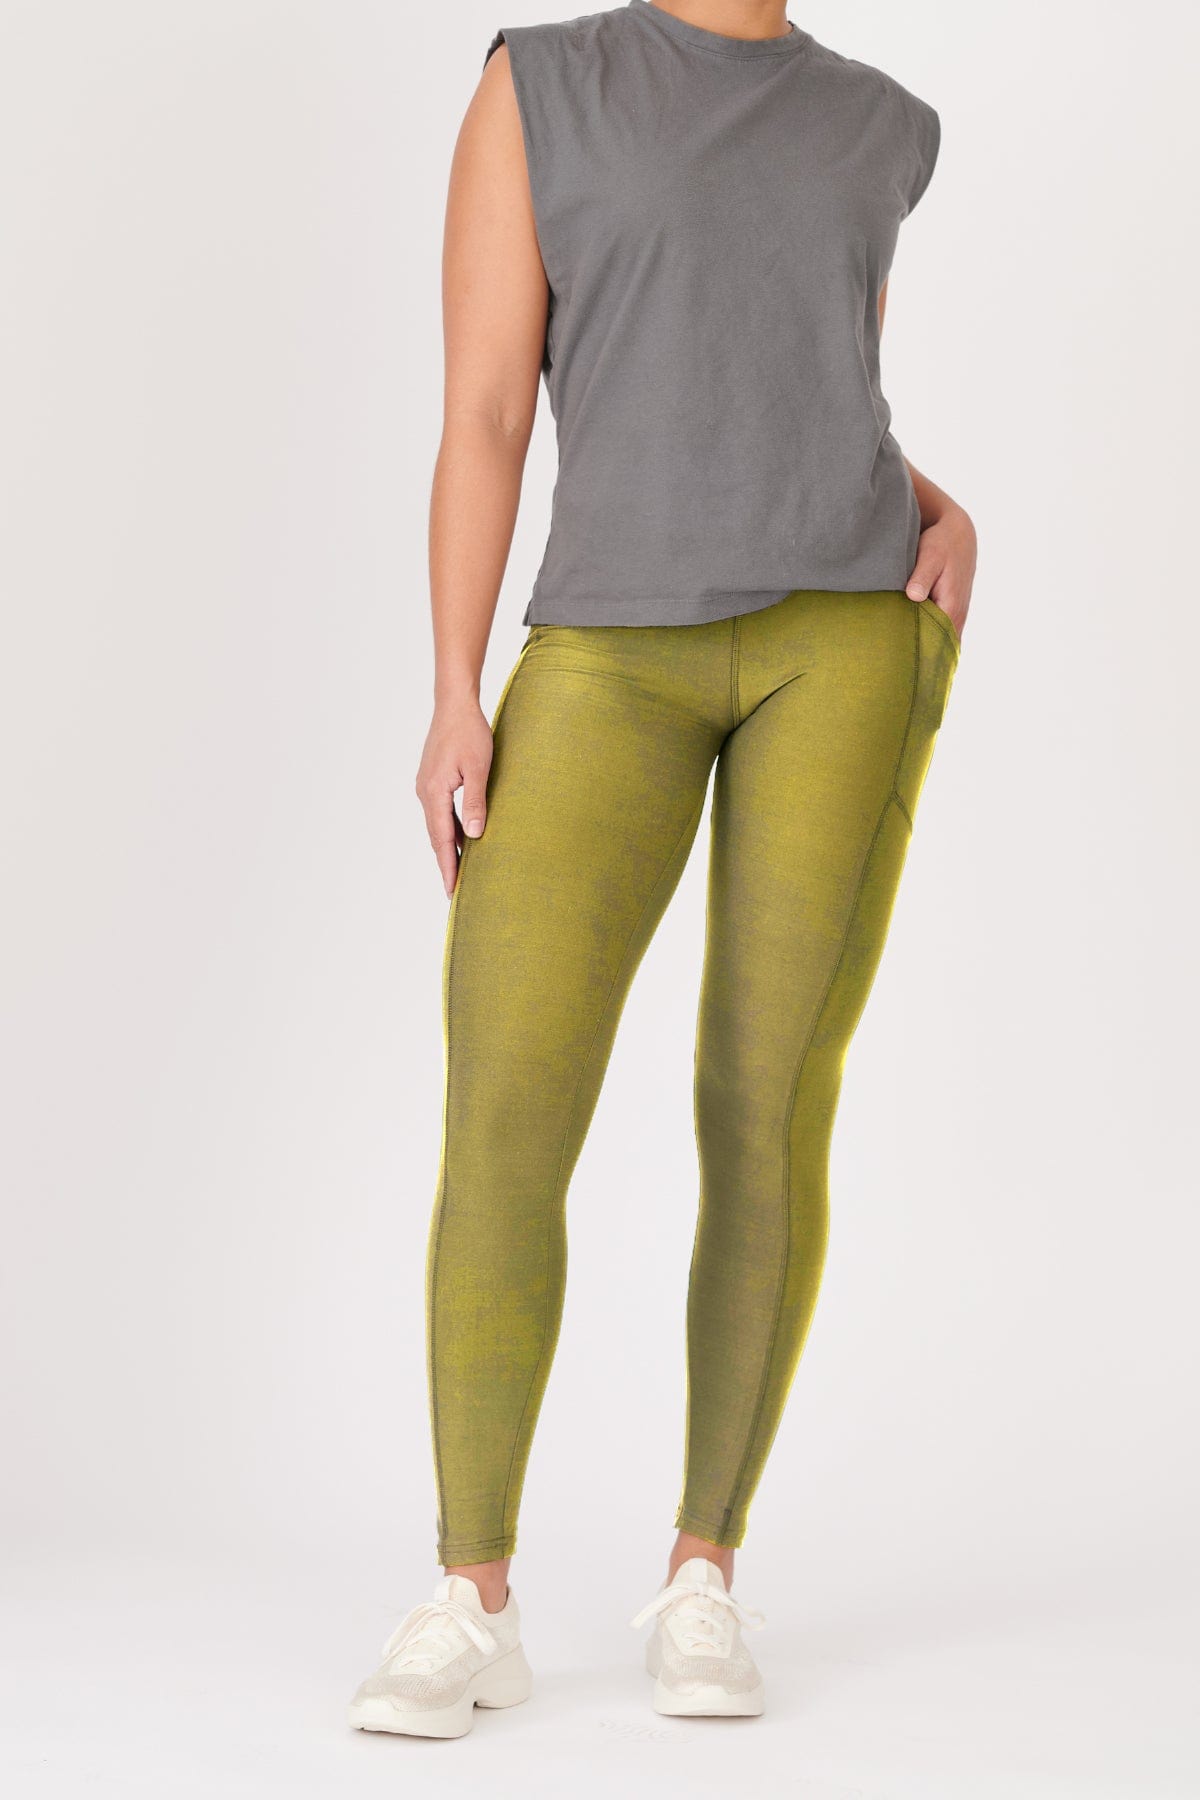 oolala Leggings Solid Army Green with Pockets 🦋 oolala ButterflySoft™ | Solid Charcoal with Pockets Women's Leggings